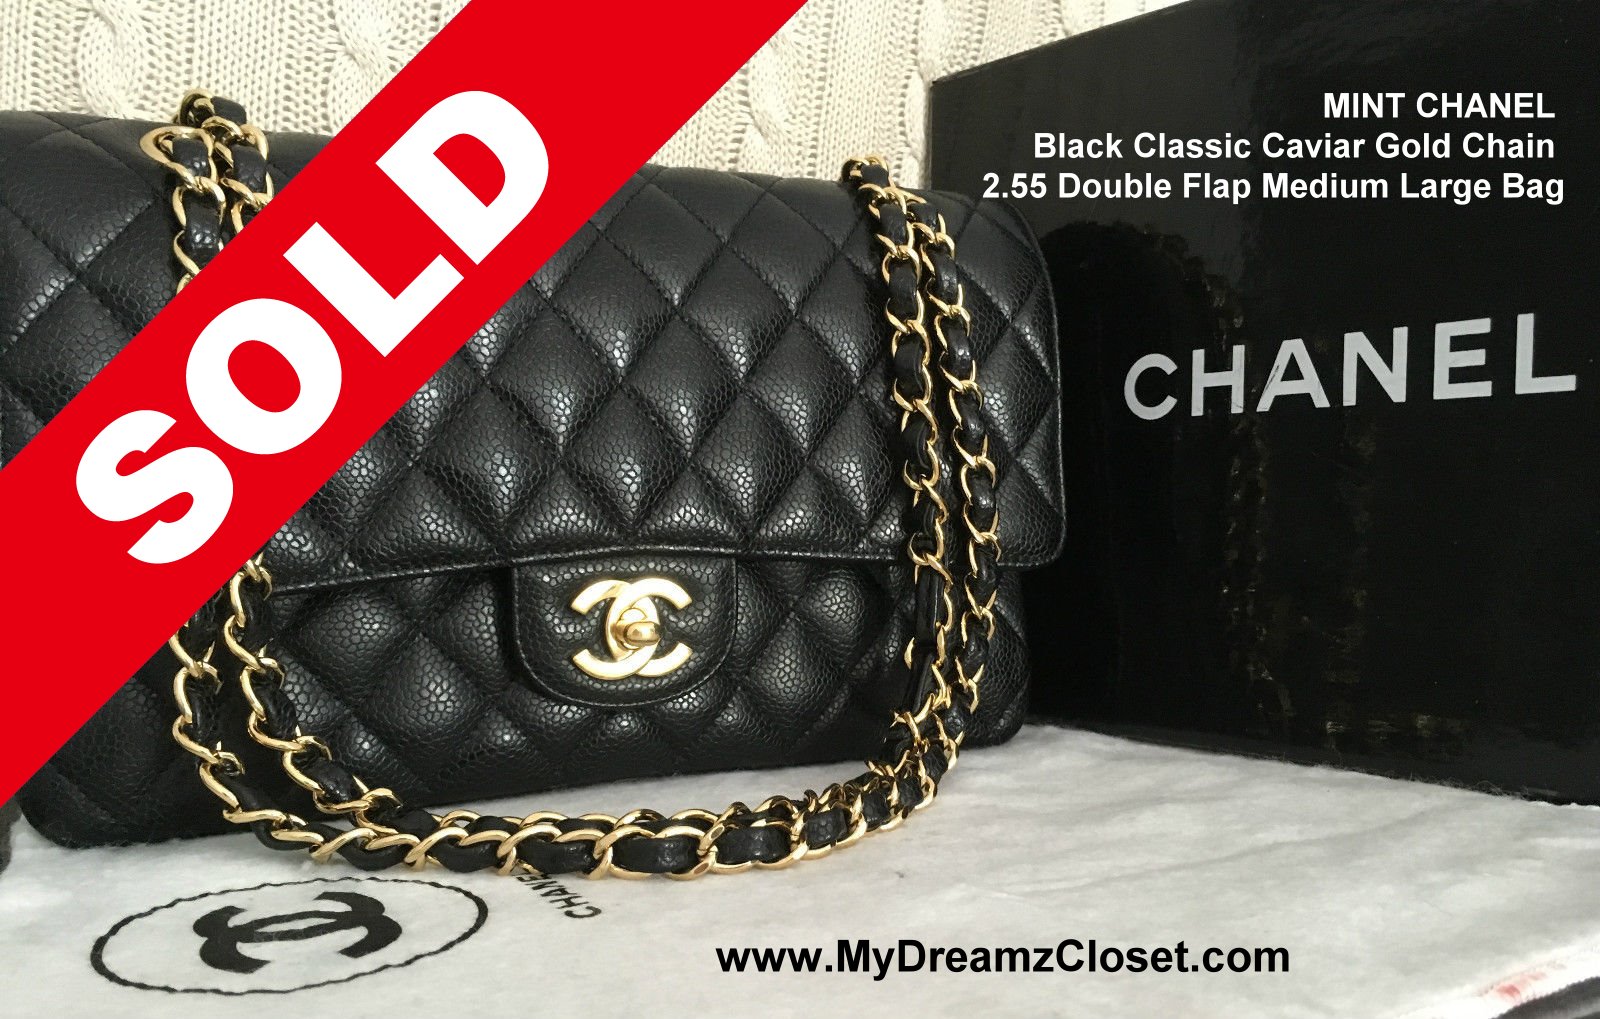 SOLD - MINT CHANEL BLACK CLASSIC CAVIAR GOLD CHAIN 2.55 DOUBLE